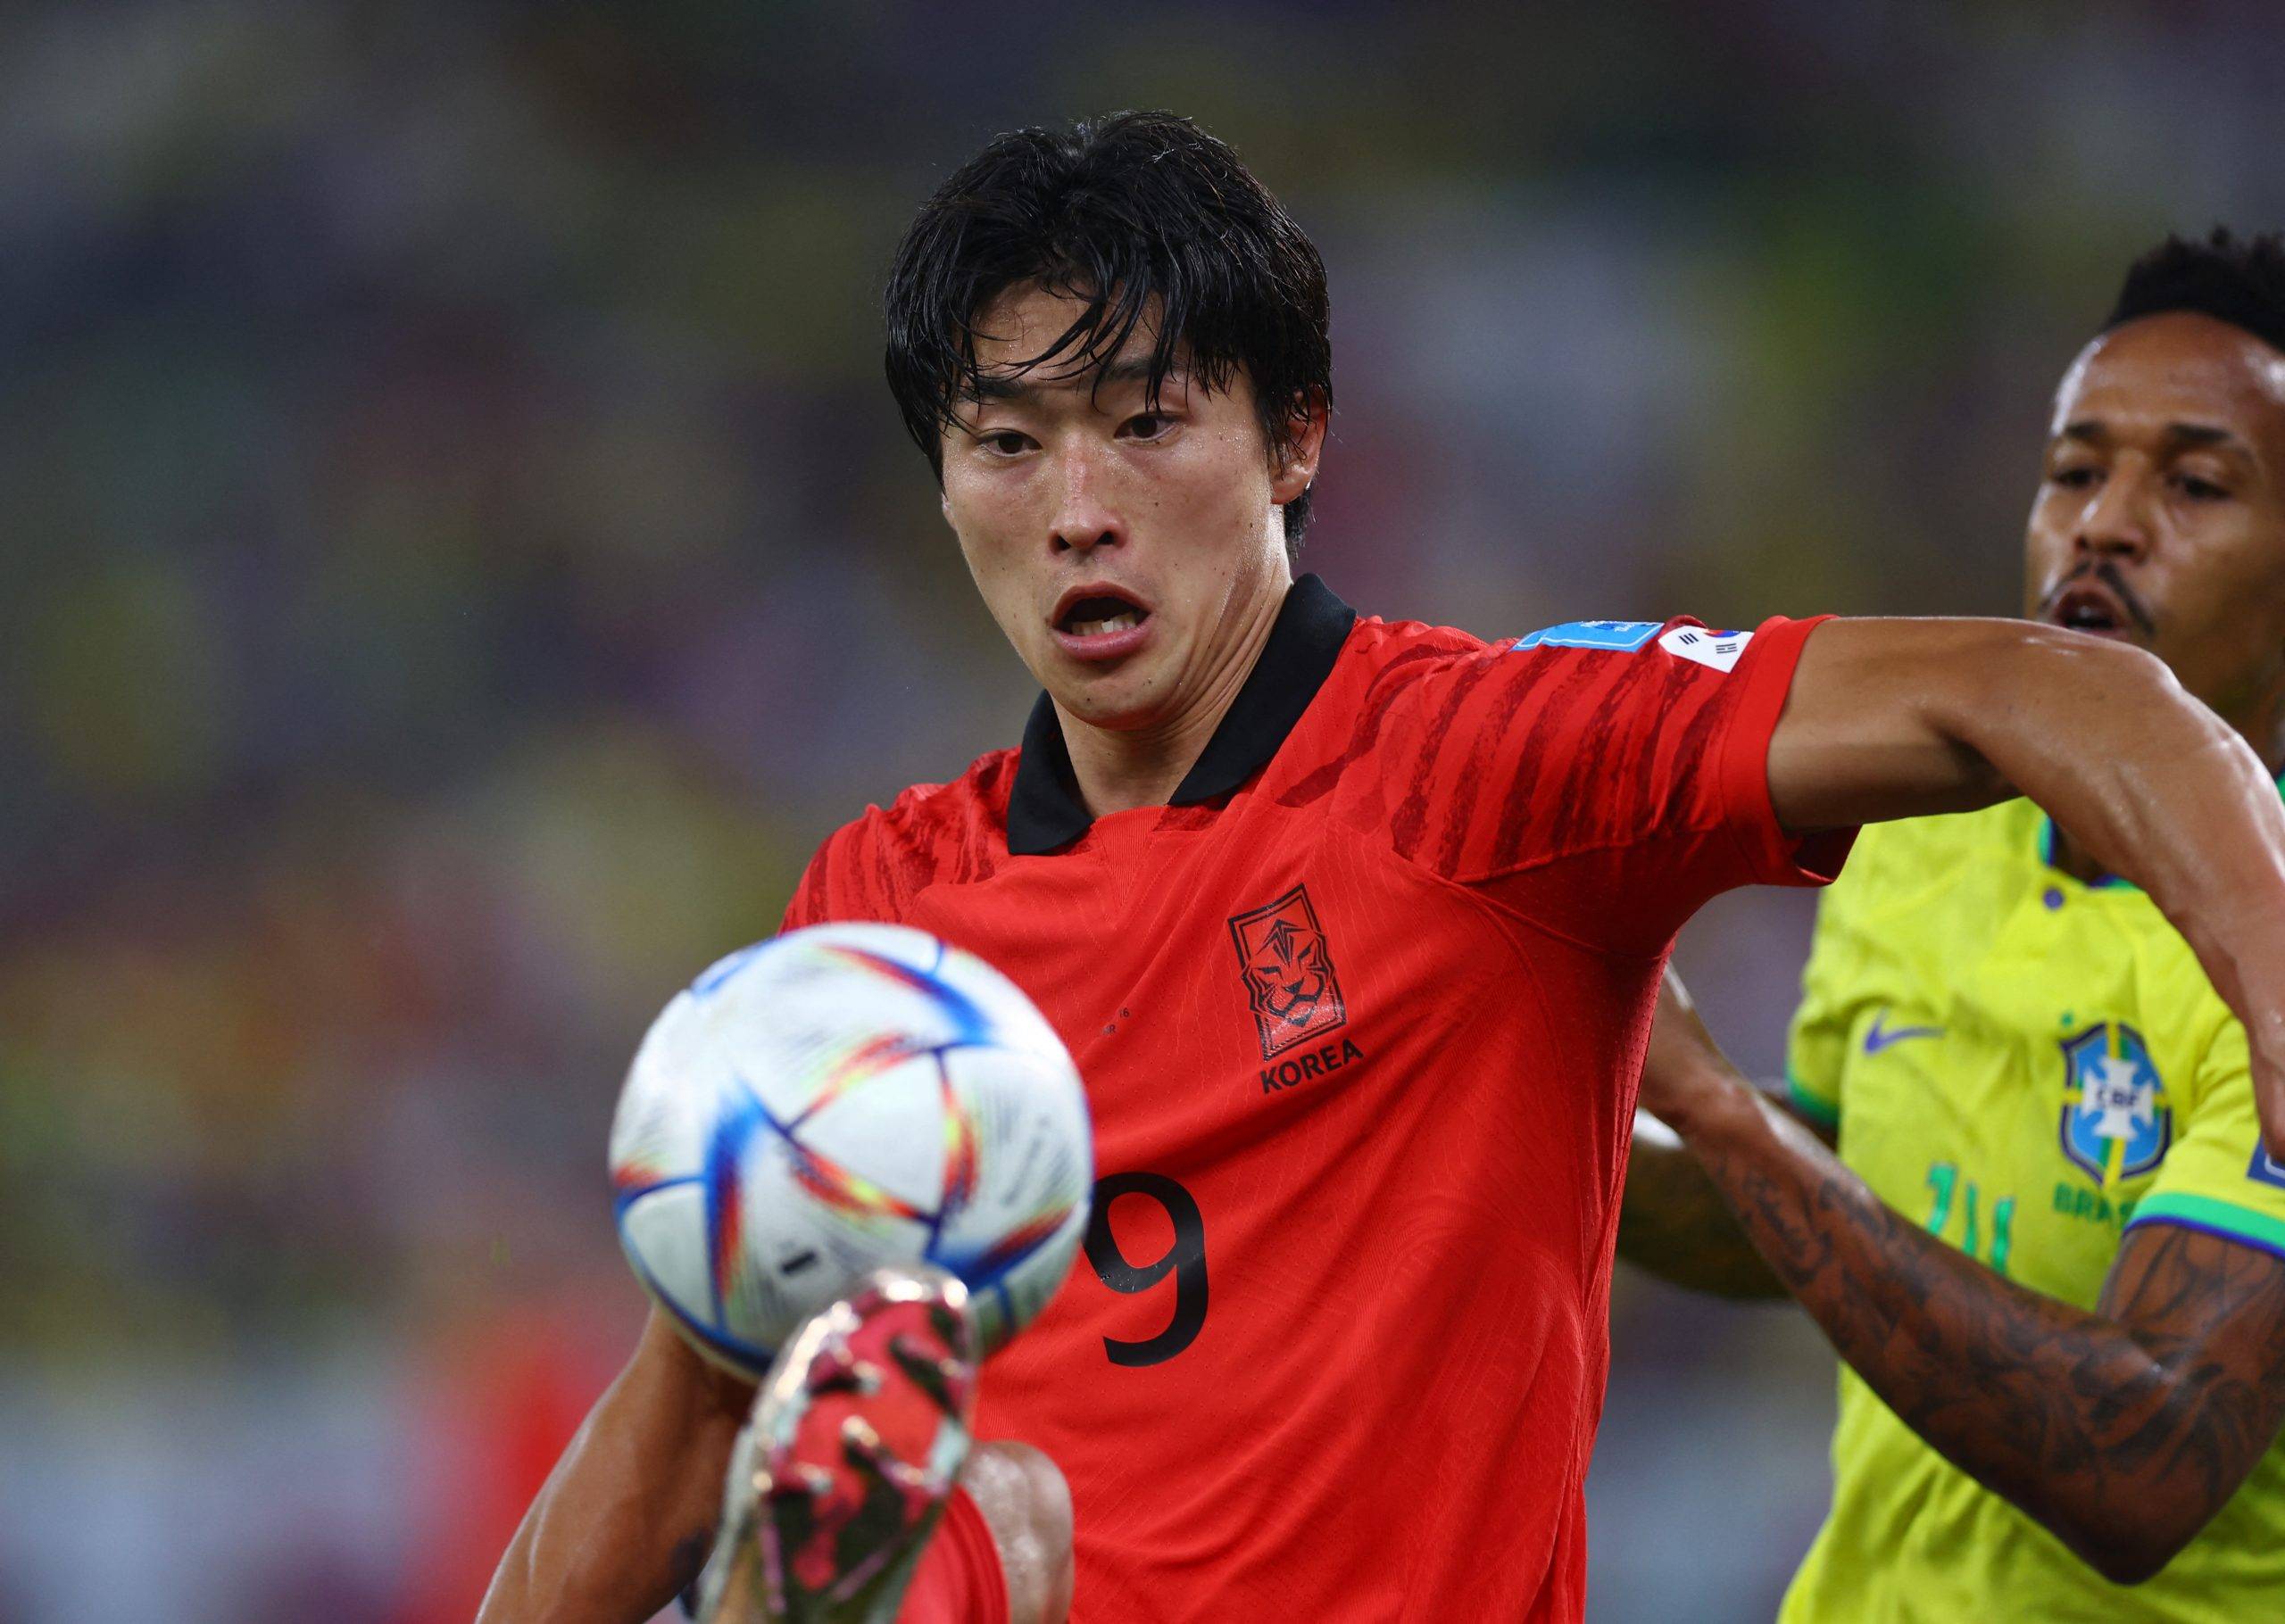 Celtic: Hoops could 'rekindle' interest in Cho Gue-sung - Celtic News